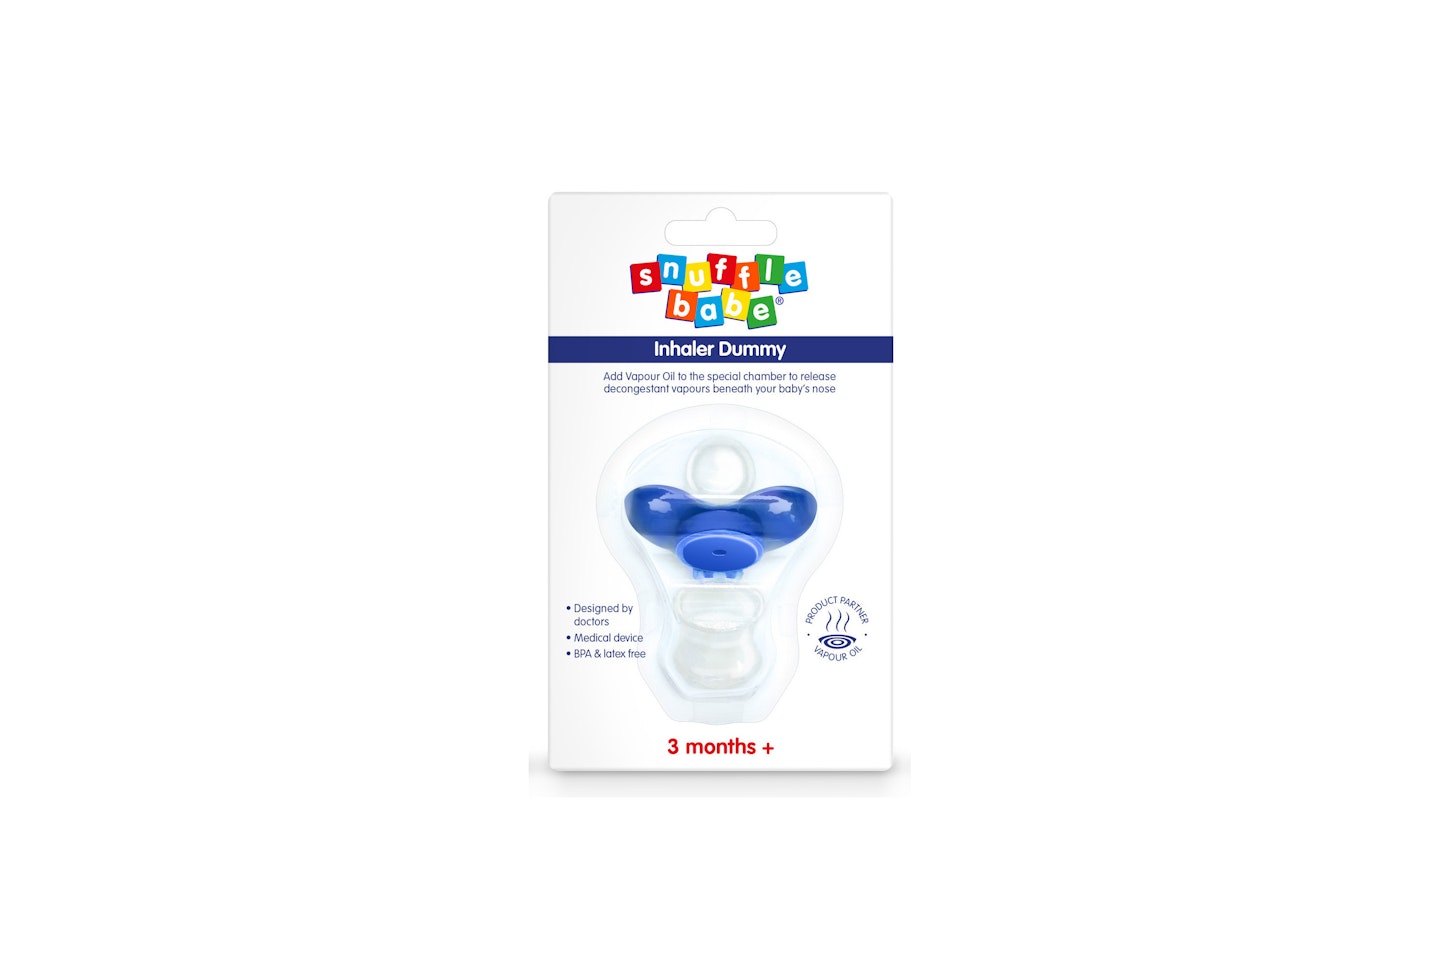 This dummy has been created by doctors to use alongside Snufflebabe vapour oil. You simply put a few drops into the special compartment in the dummy, which sits near your baby’s nose, so that he can inhale the vapours while he sucks on the dummy. The oil